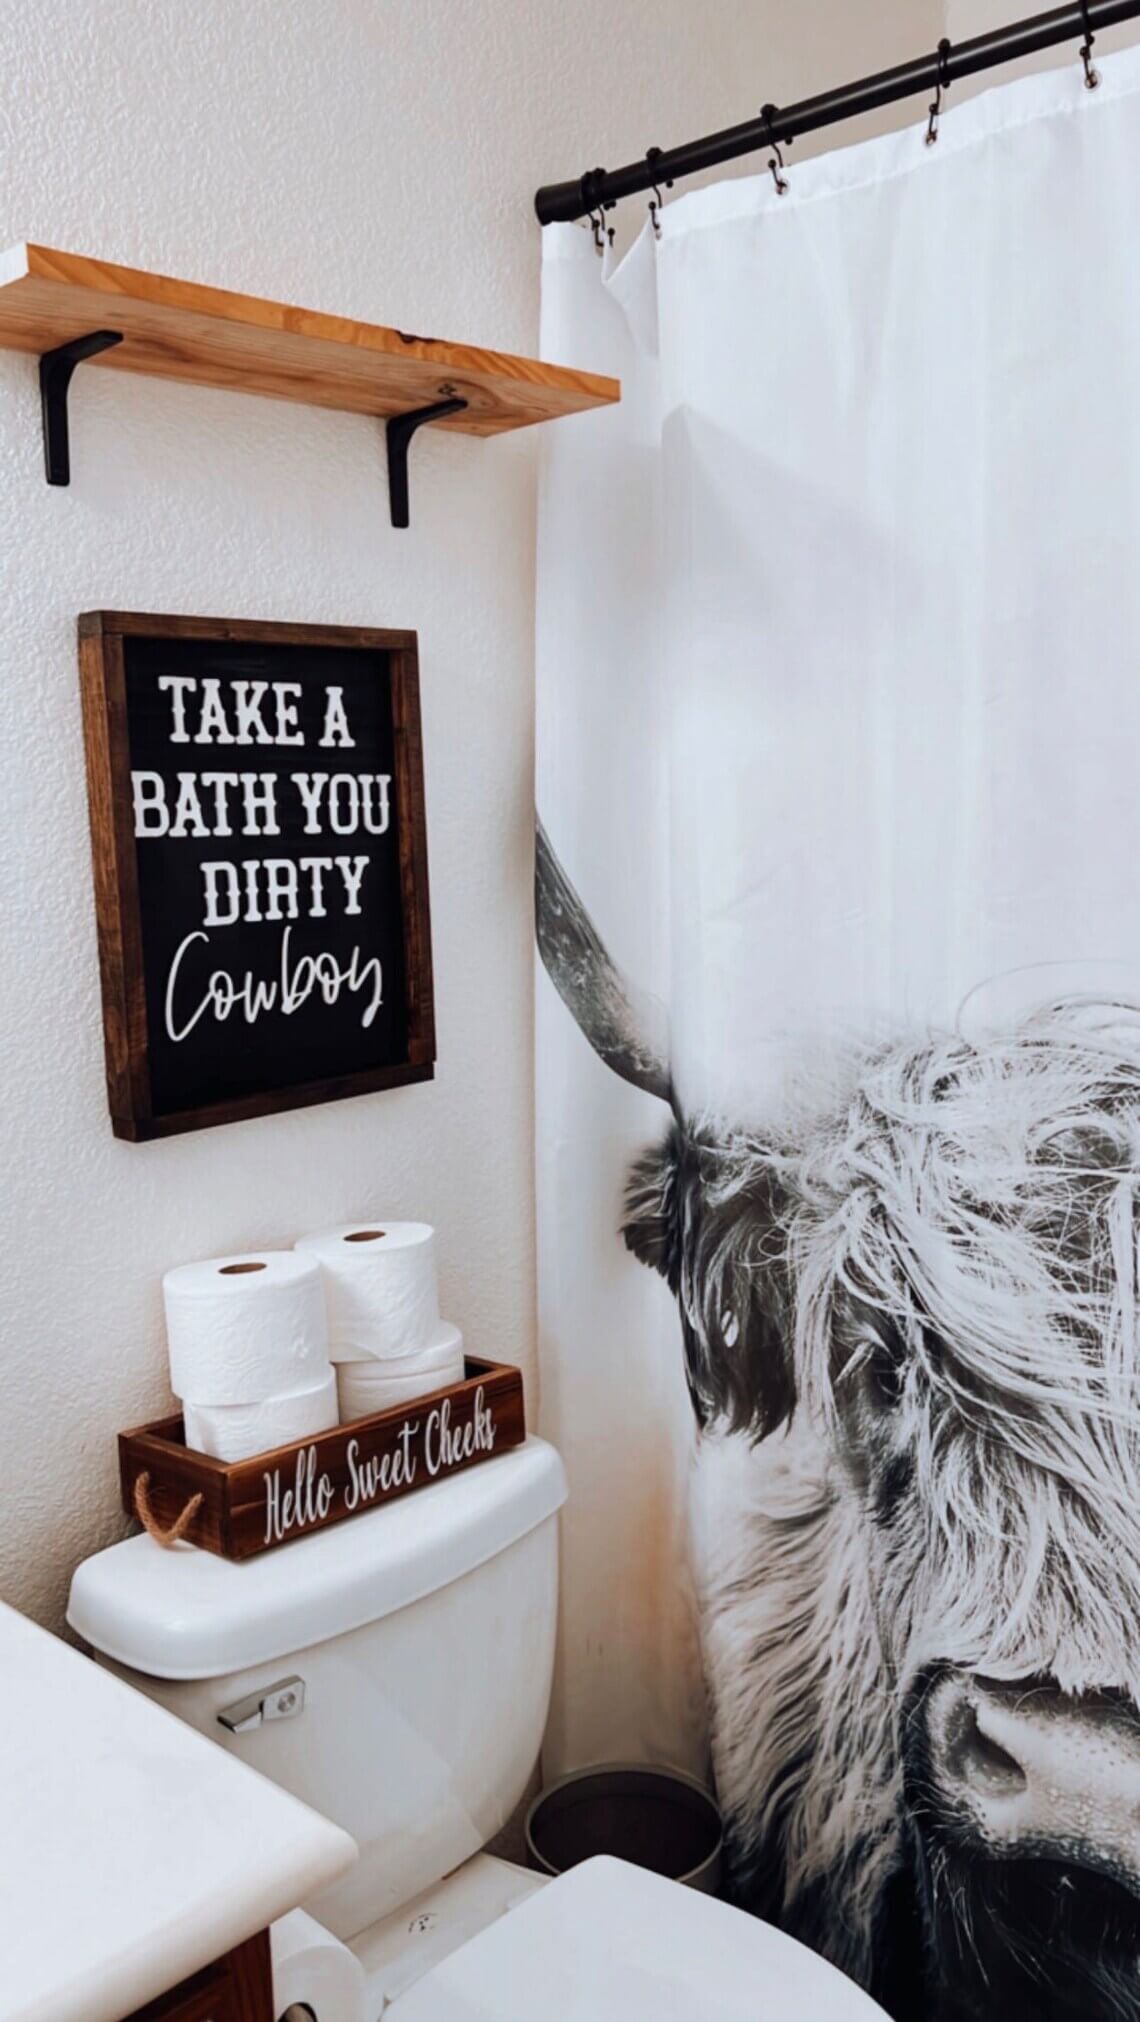 Humorous Hand-Painted Sign for Cowboys or Cowgirls